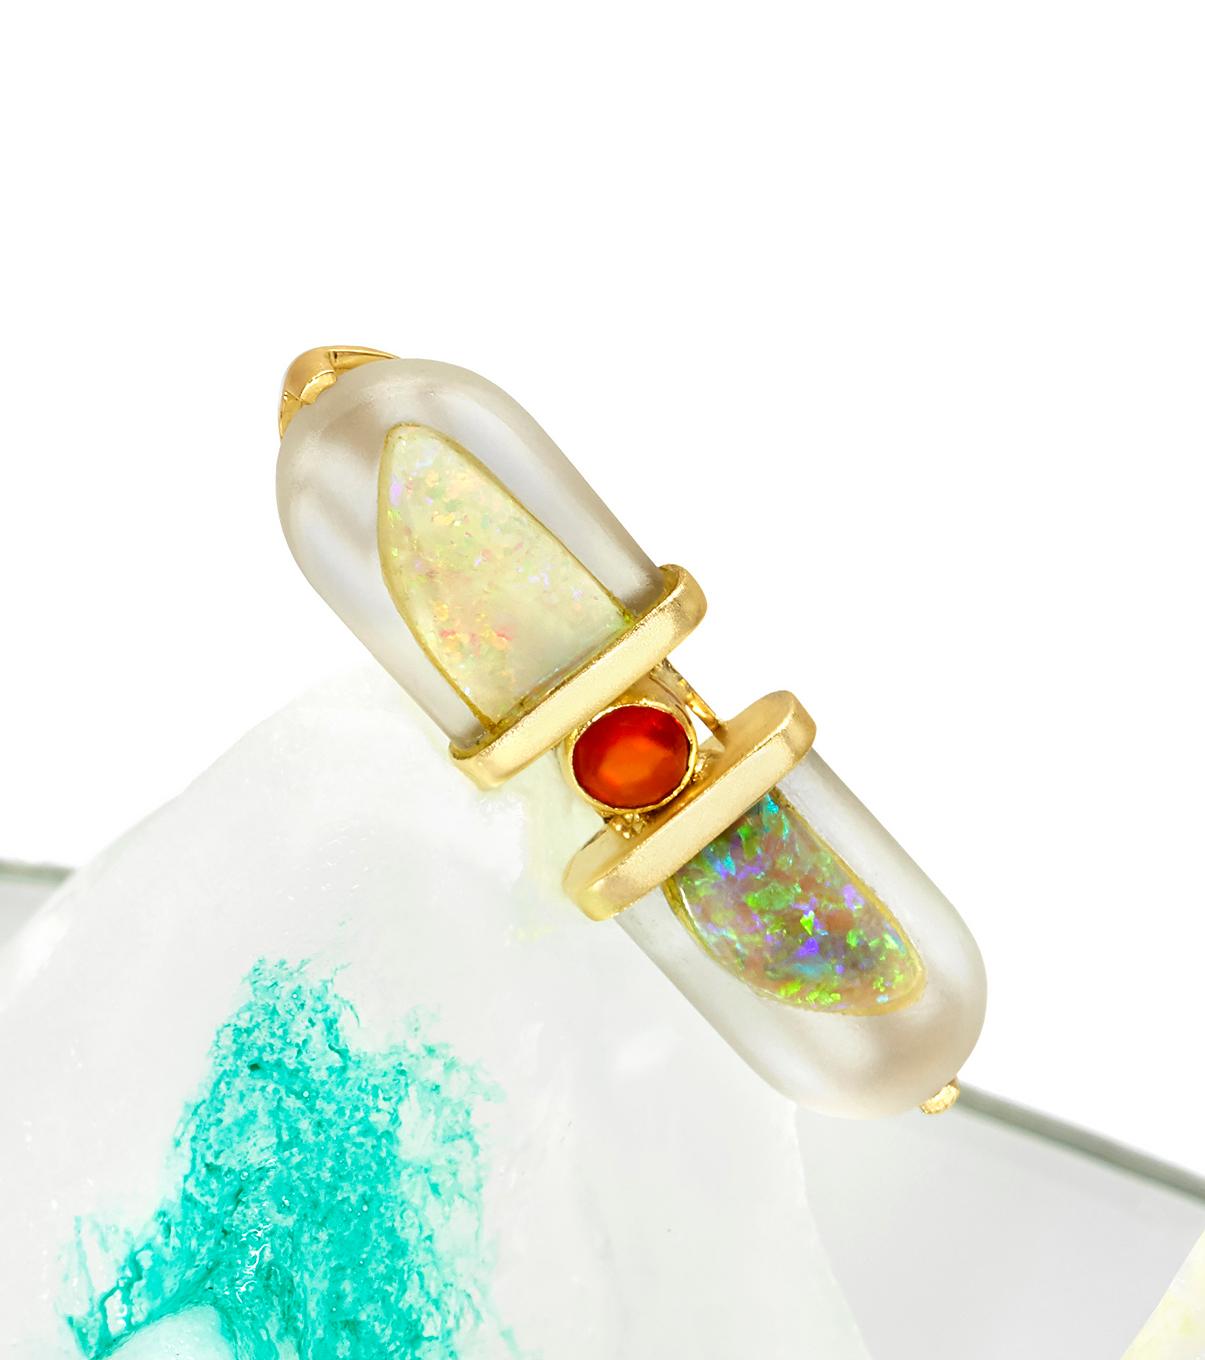 This modern handmade British-London Hallmarked 18 karat yellow gold ring, set with hand-carved abstract shape rock crystal and colorful opal including fire opal in the center is from MAIKO NAGAYAMA's Haute Couture Collection called 